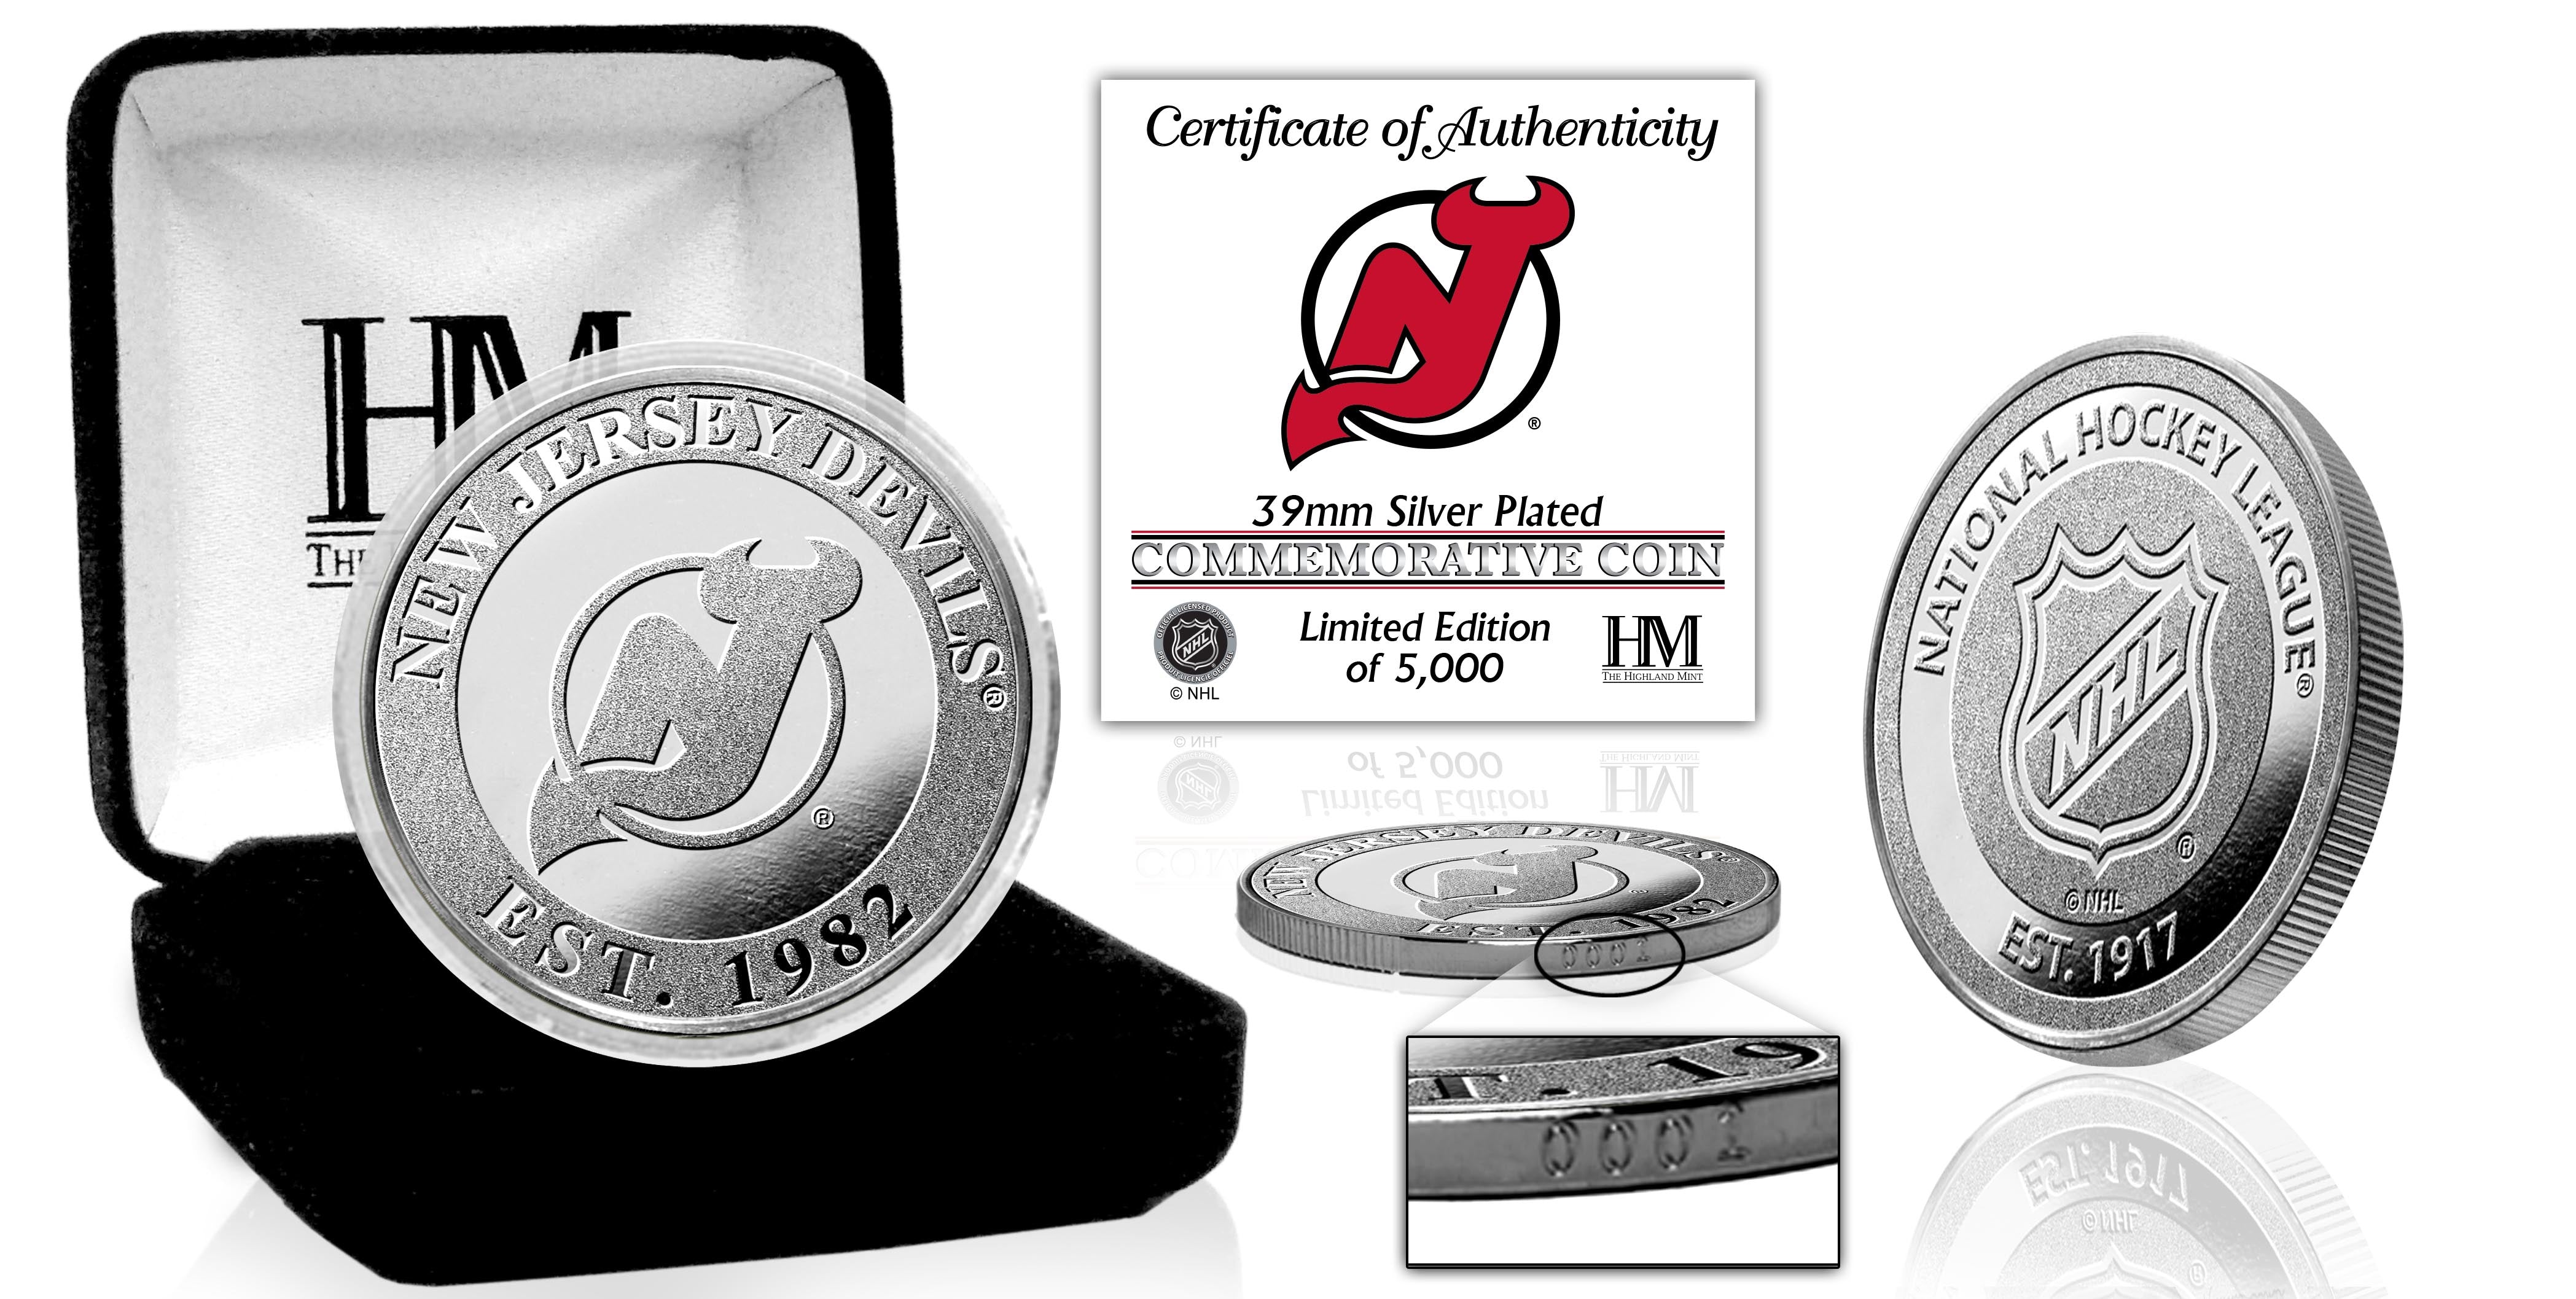 New Jersey Devils Silver Mint Coin